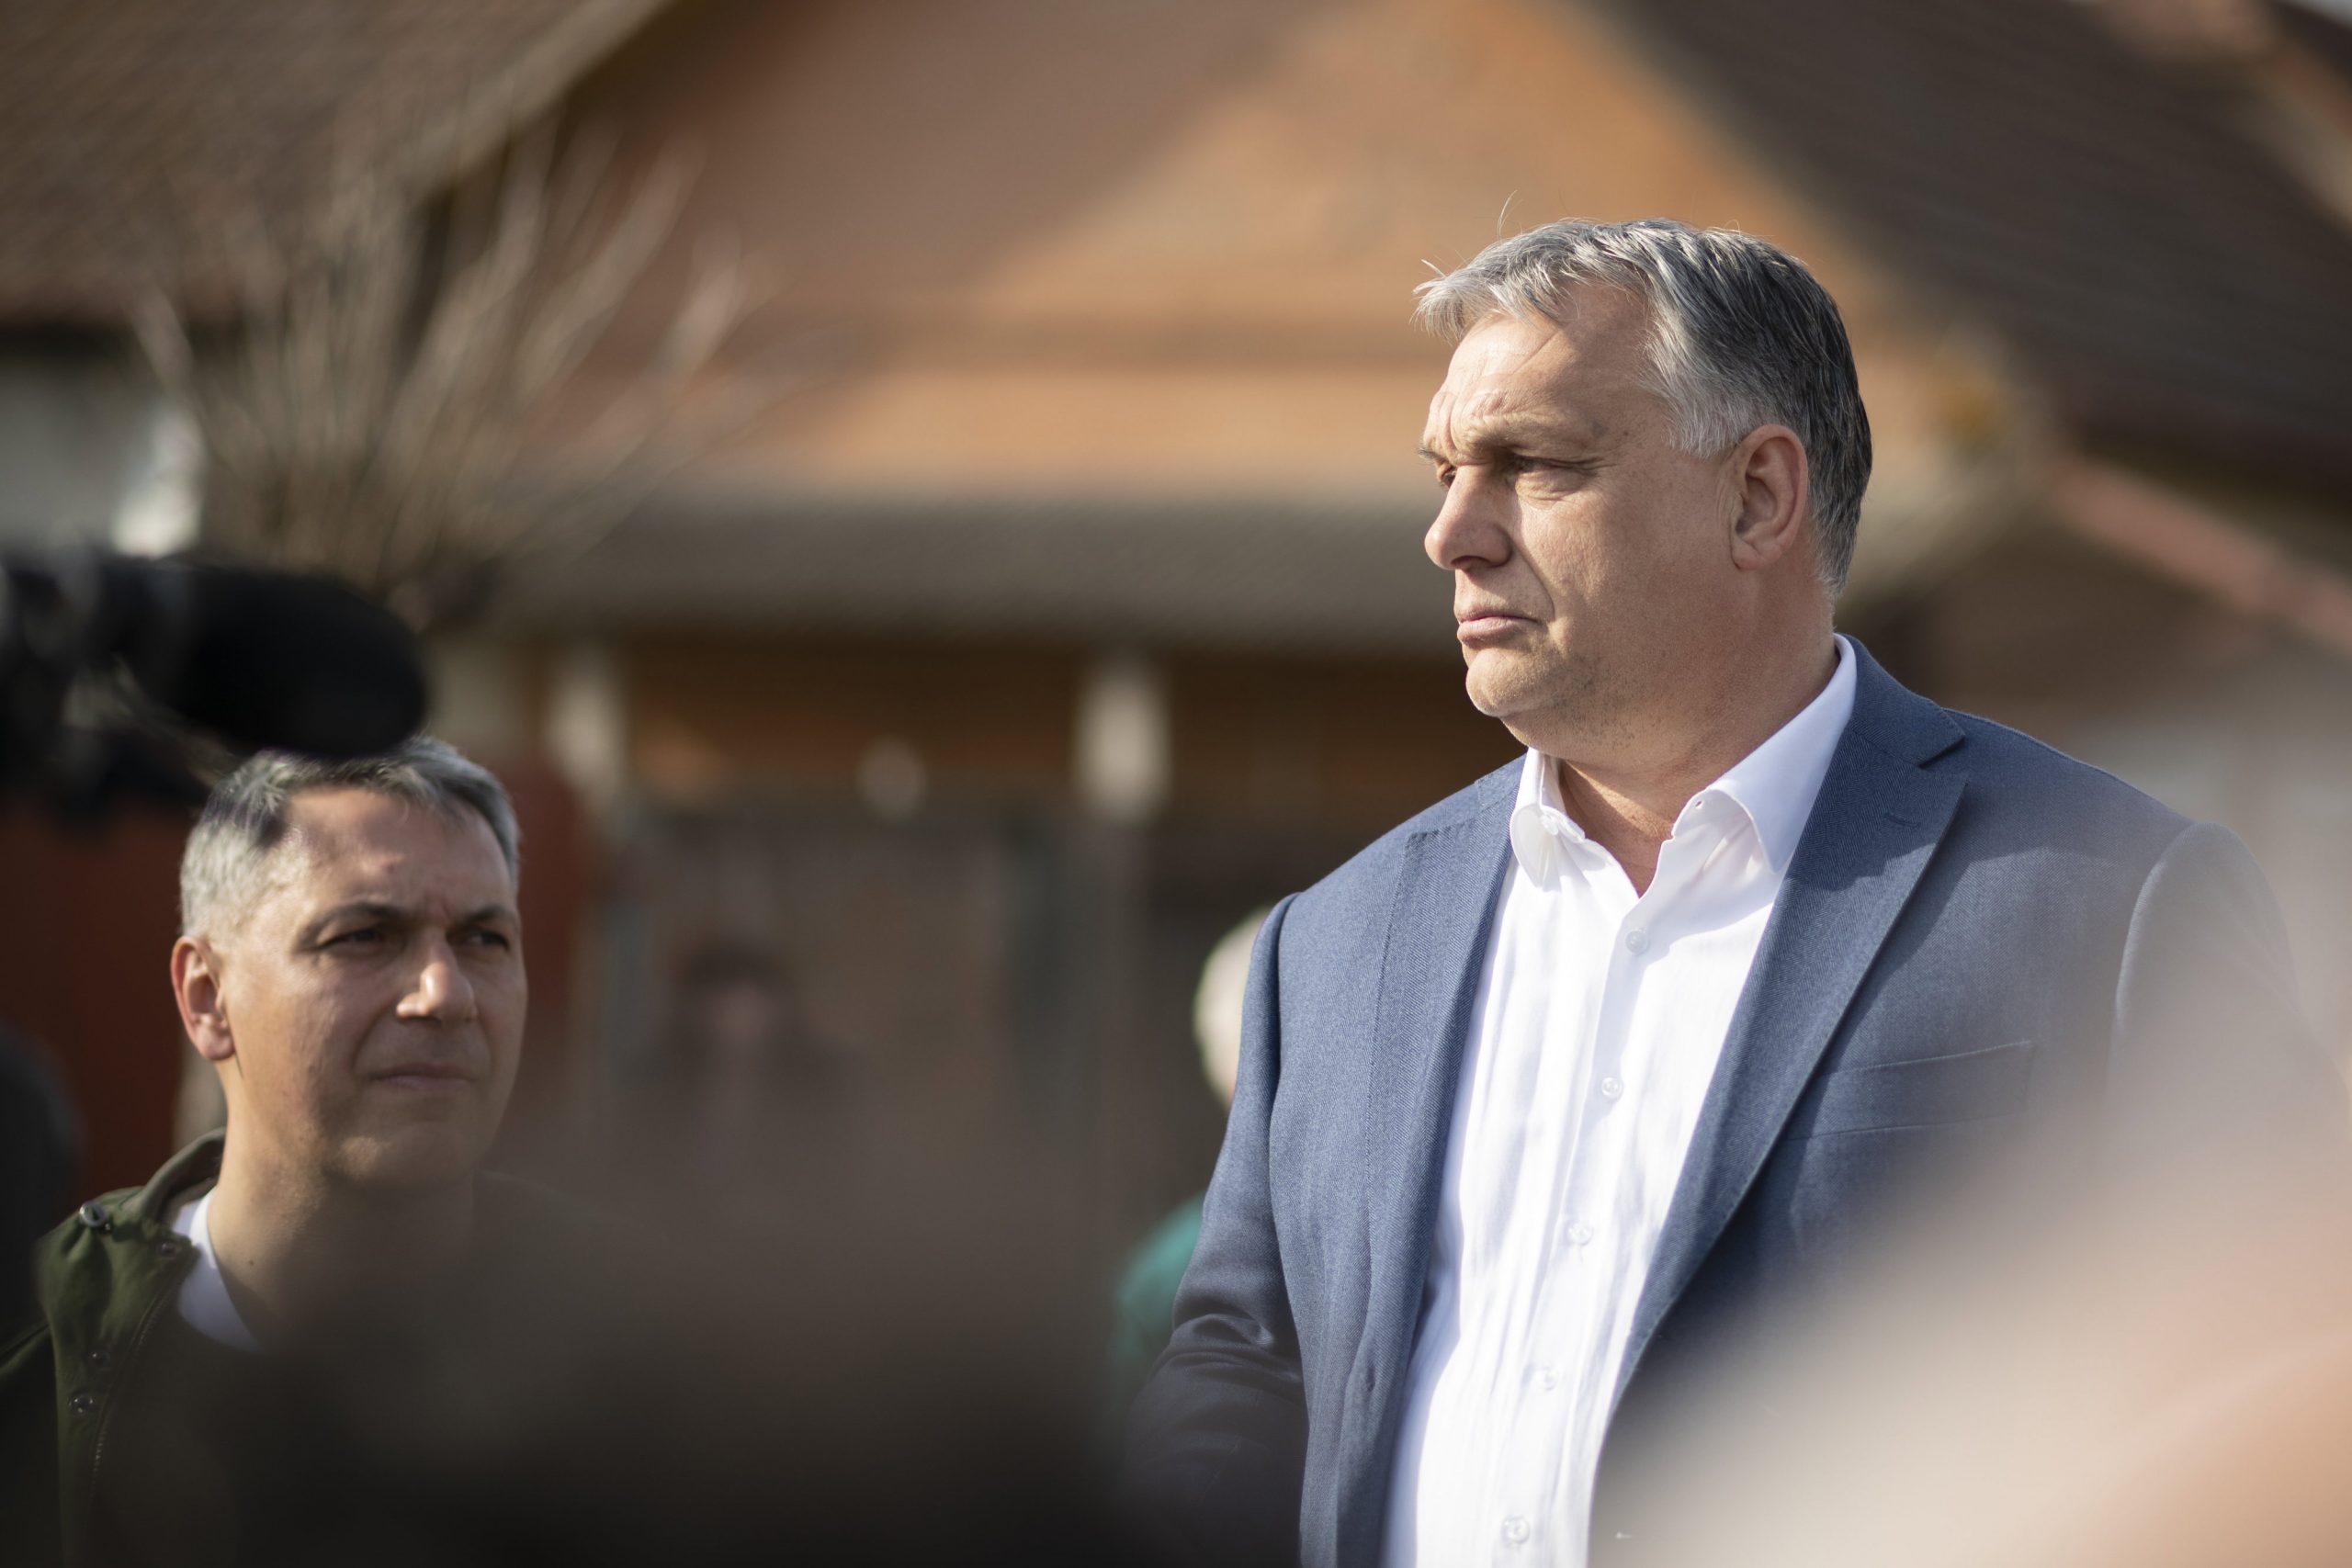 Fifth Orbán Gov't to Change Policy and Focus on Economic Crisis Management?